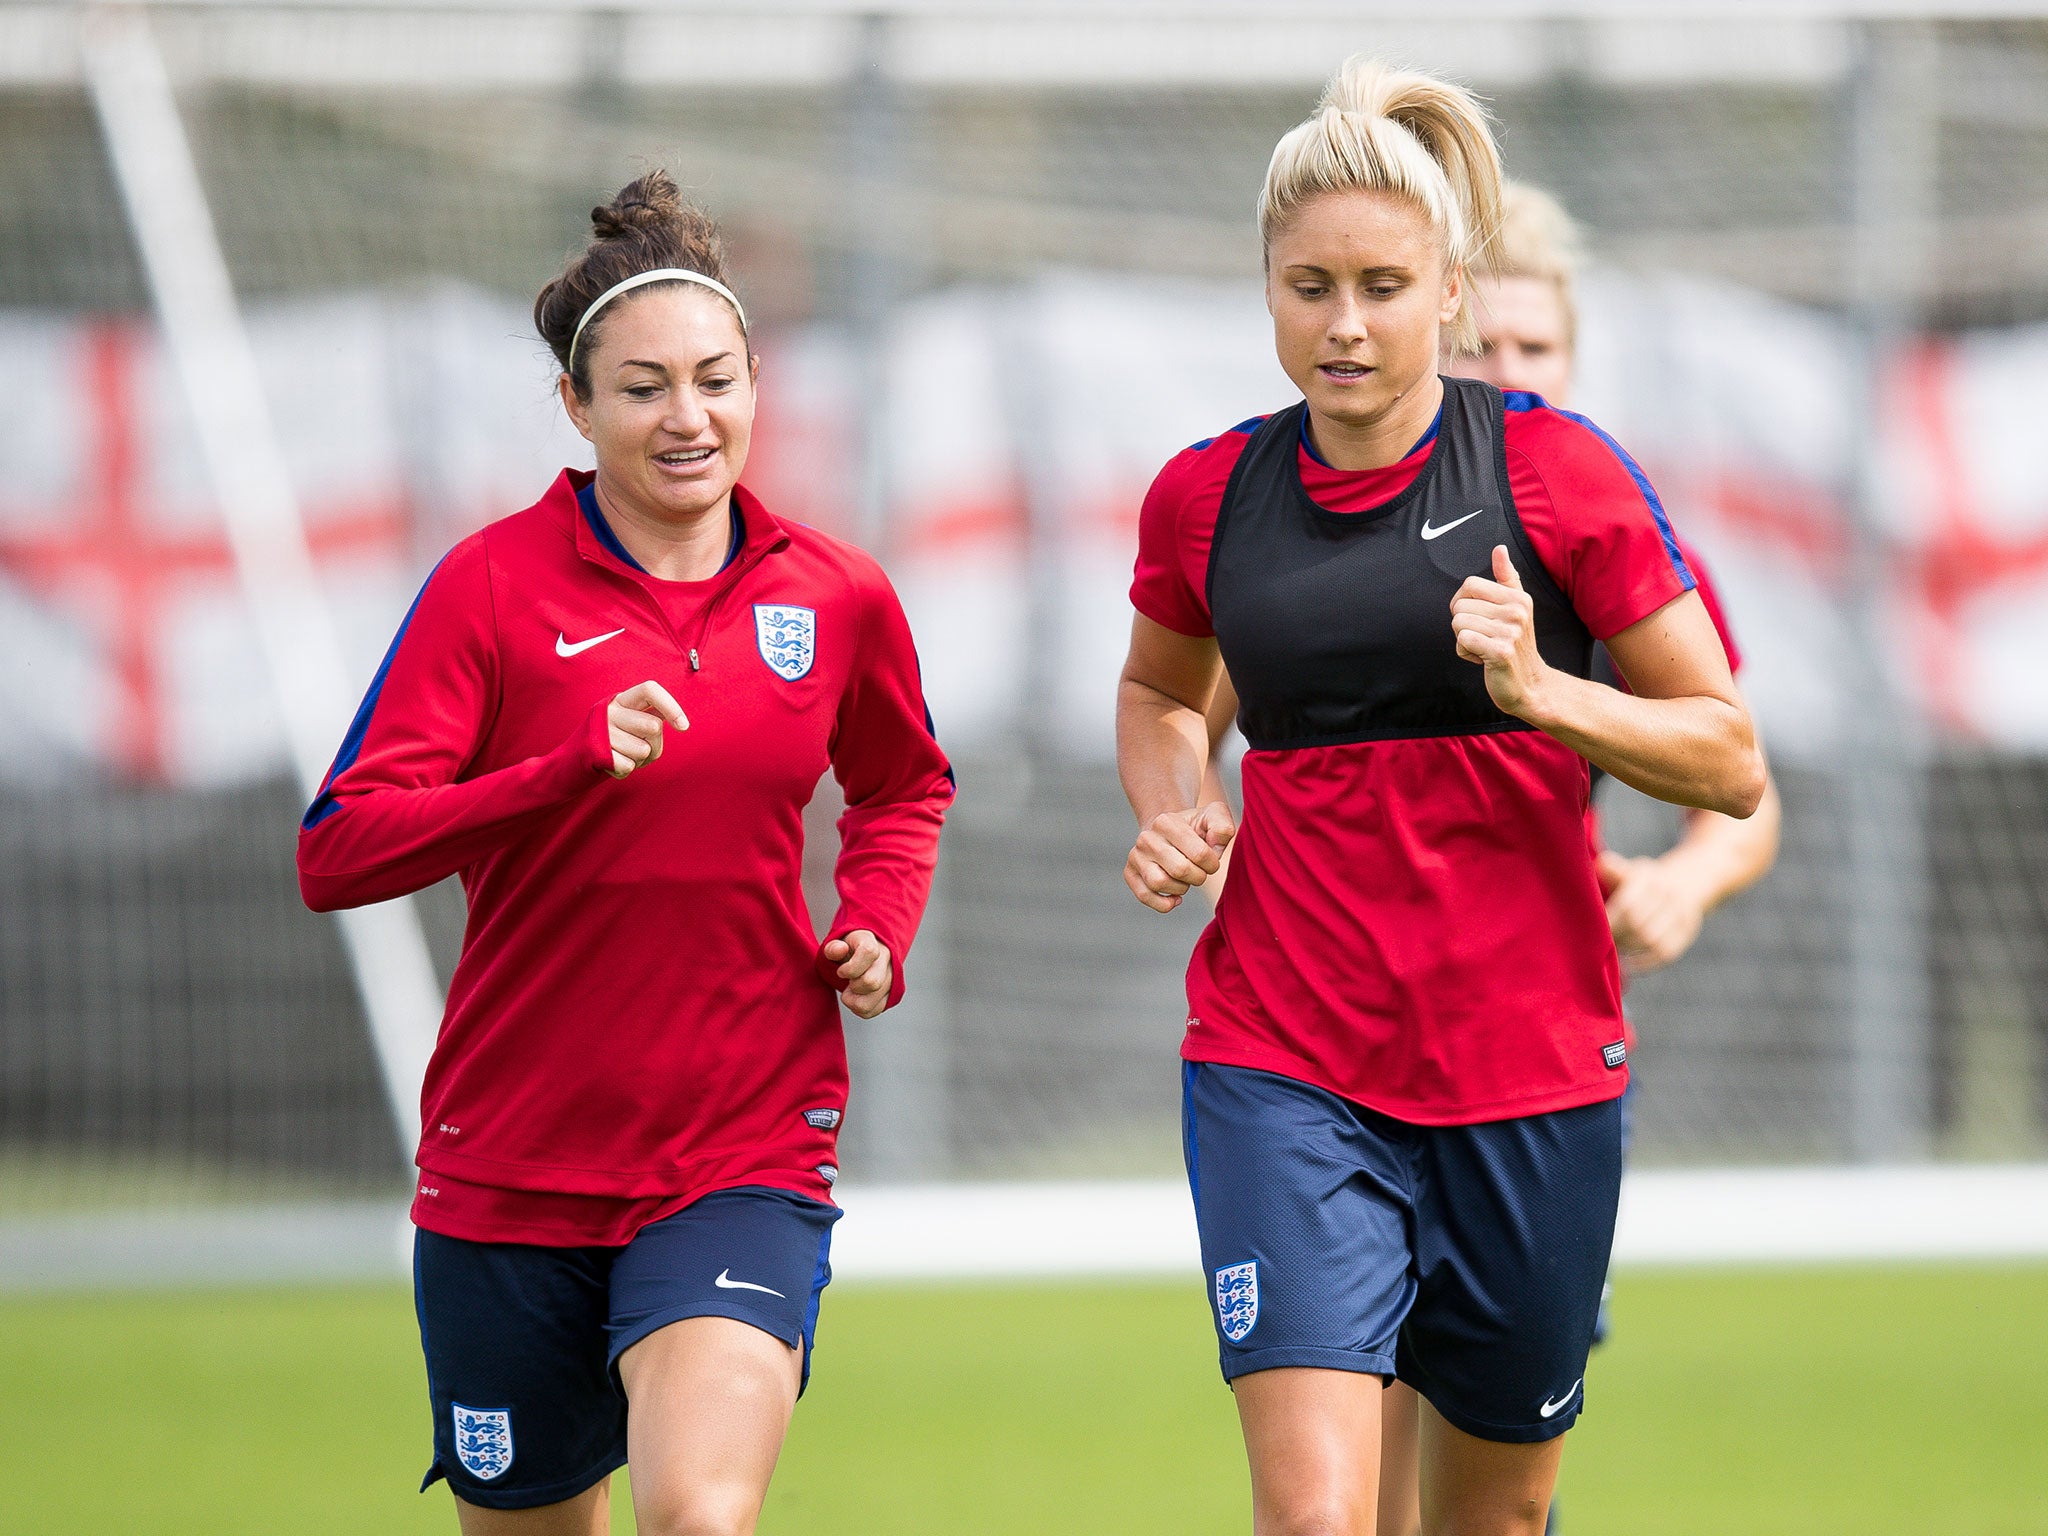 Houghton in training with England team-mate Jodie Taylor